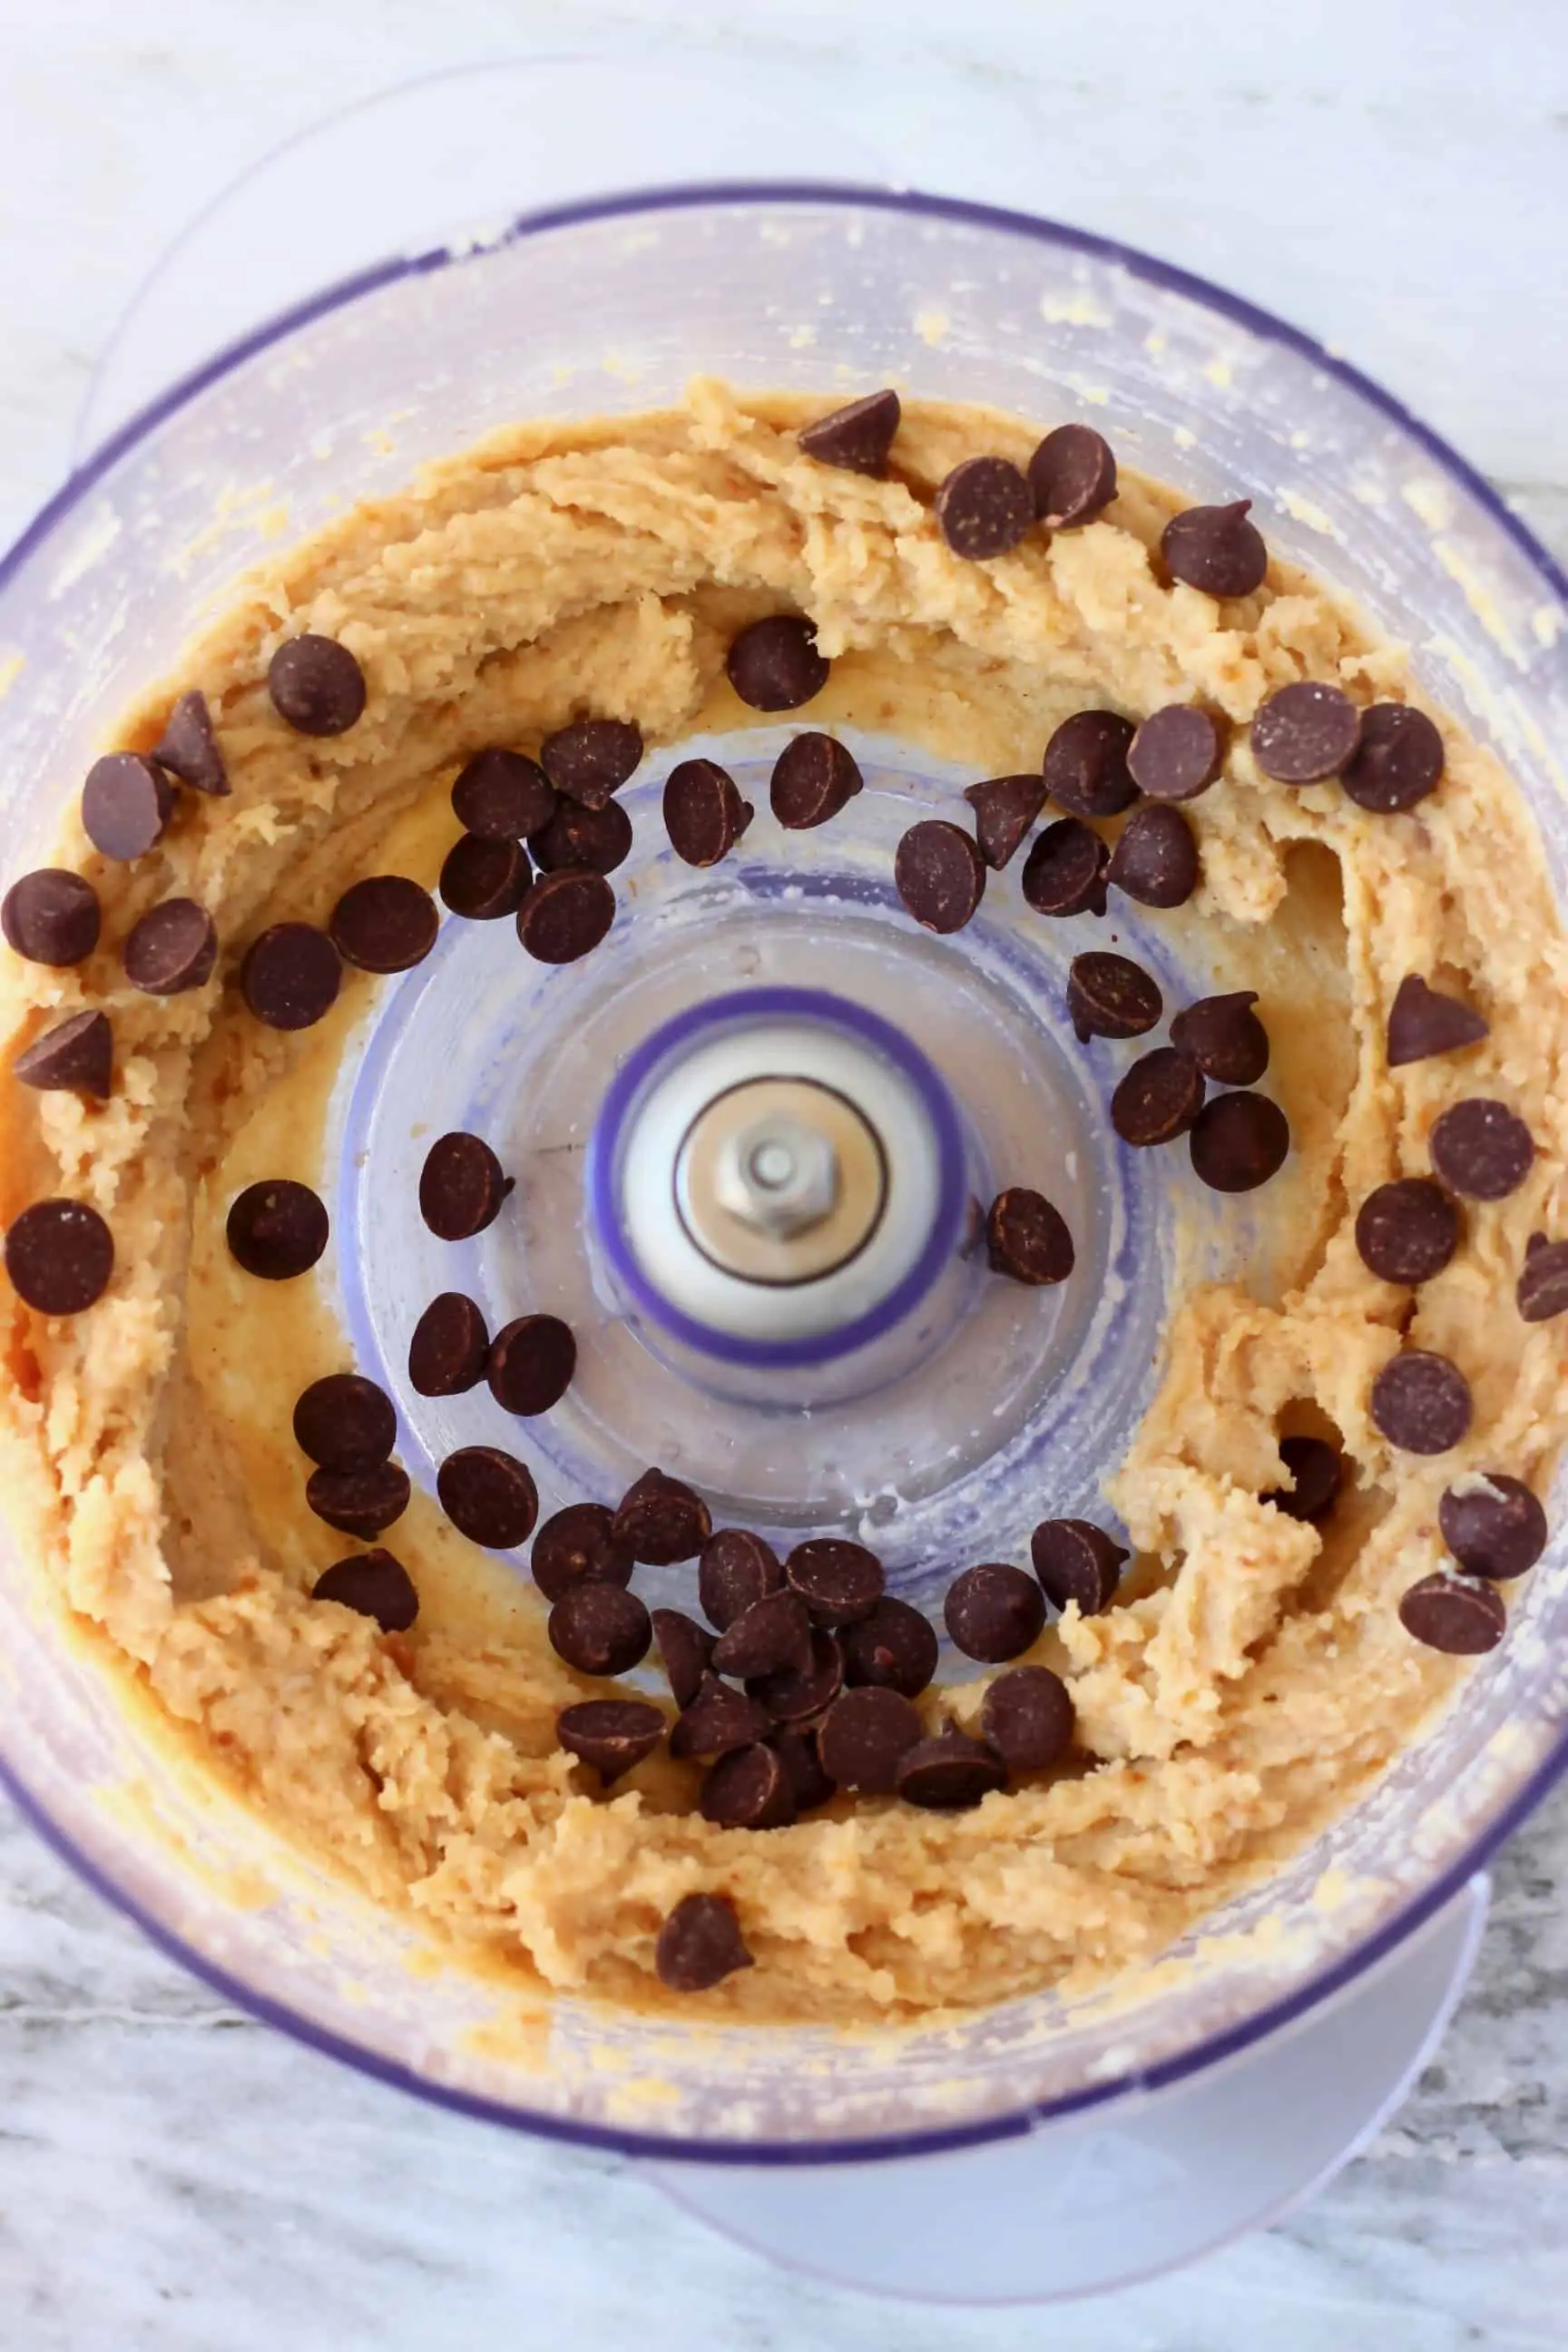 Vegan cookie dough and chocolate chips in a food processor against a marble background